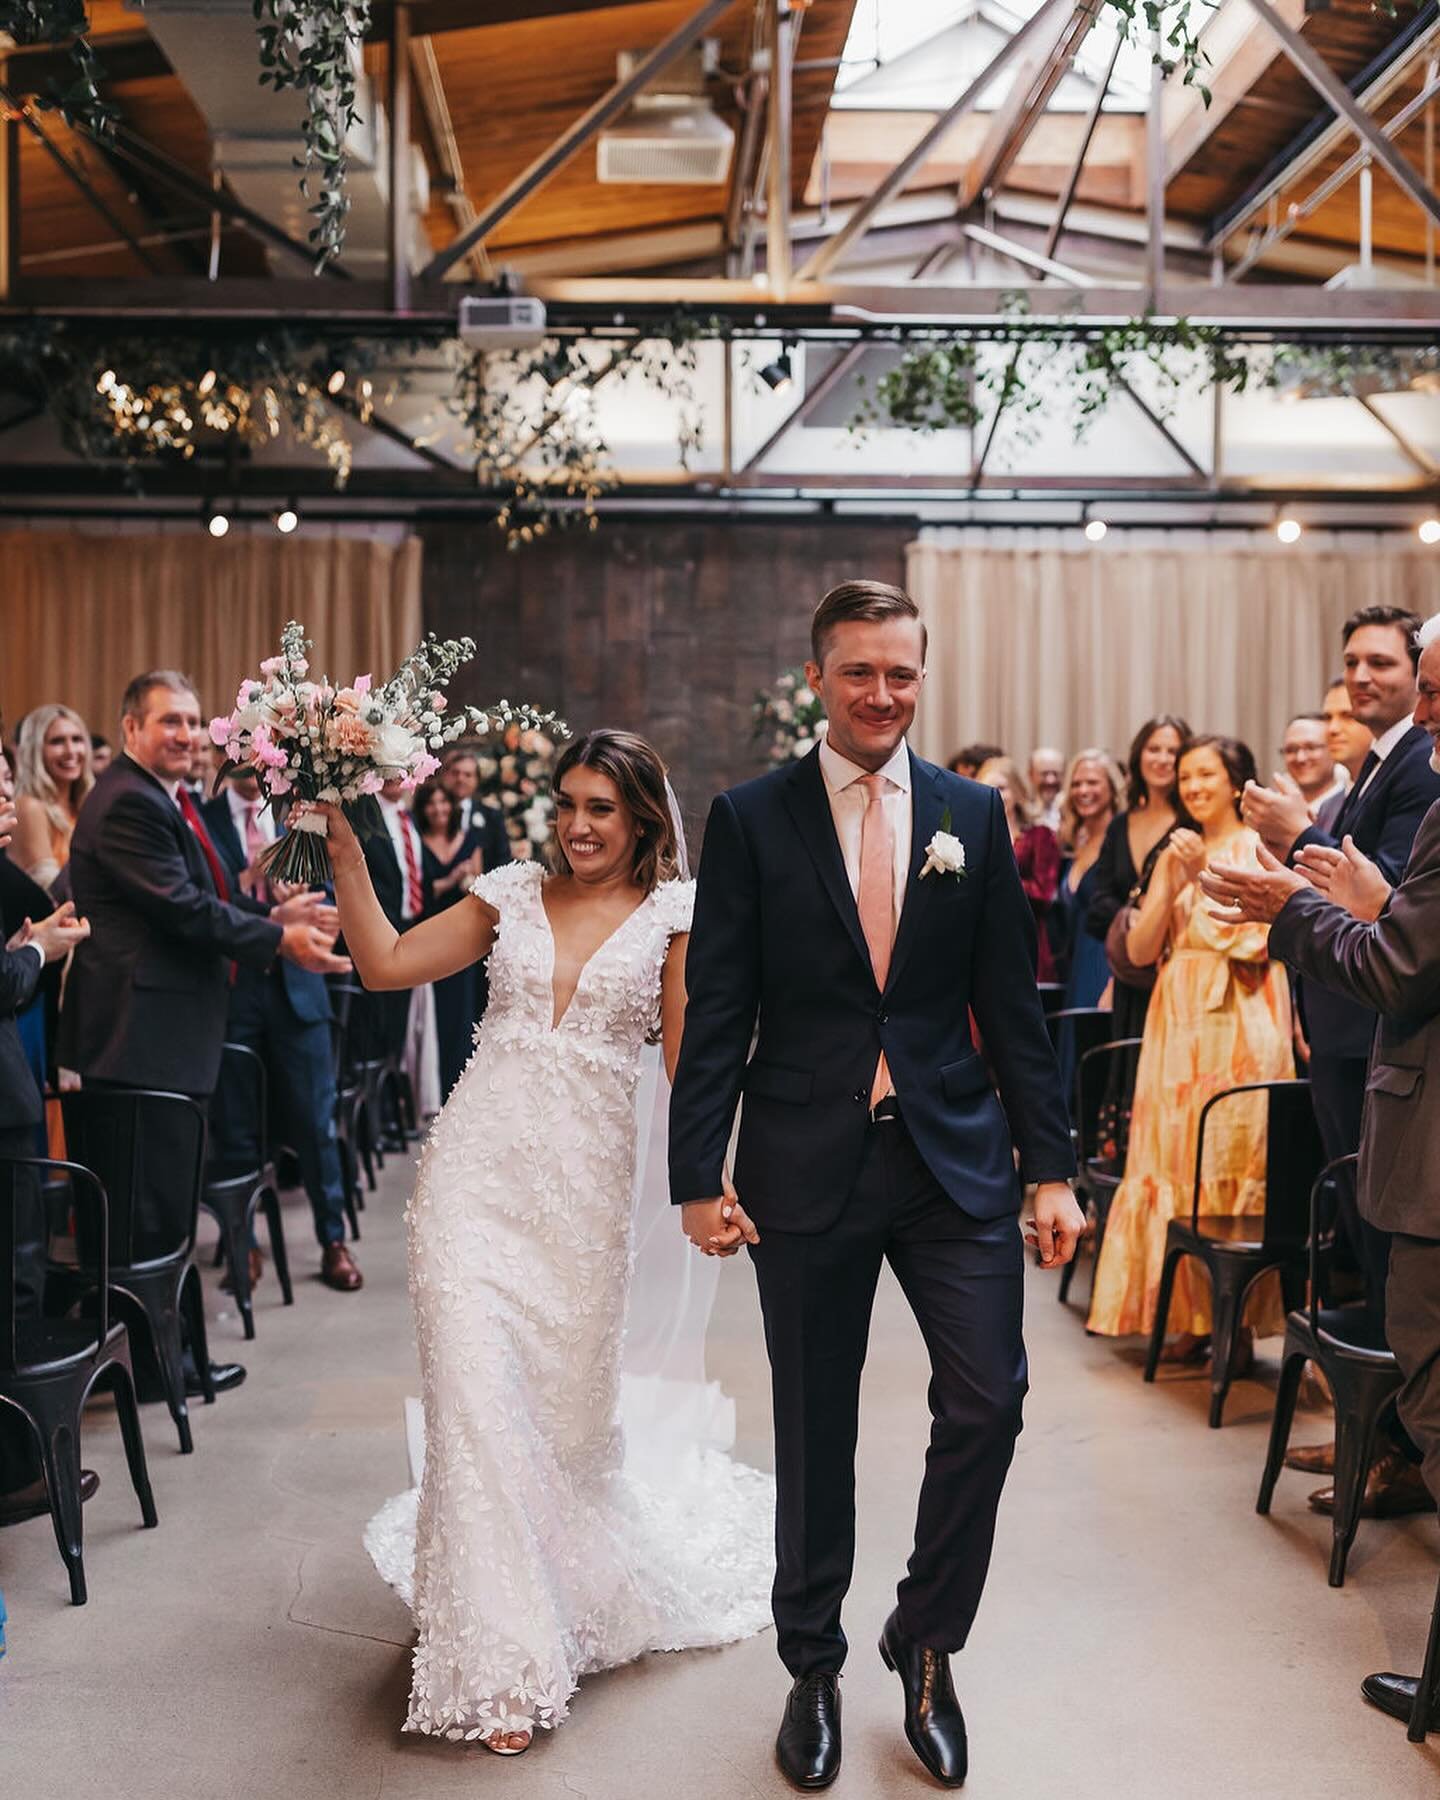 Happy first anniversary to Clem + Drew! 🎉🍾🥂

We&rsquo;re so glad we got to be a part of your beautiful, flower-filled spring wedding day last year! 💖🌸

BDP Event Producer | Jasmine Vukmarkovic
📍 | @ovationchicago 
📋 | @afresheventco
🥘 | @bigd